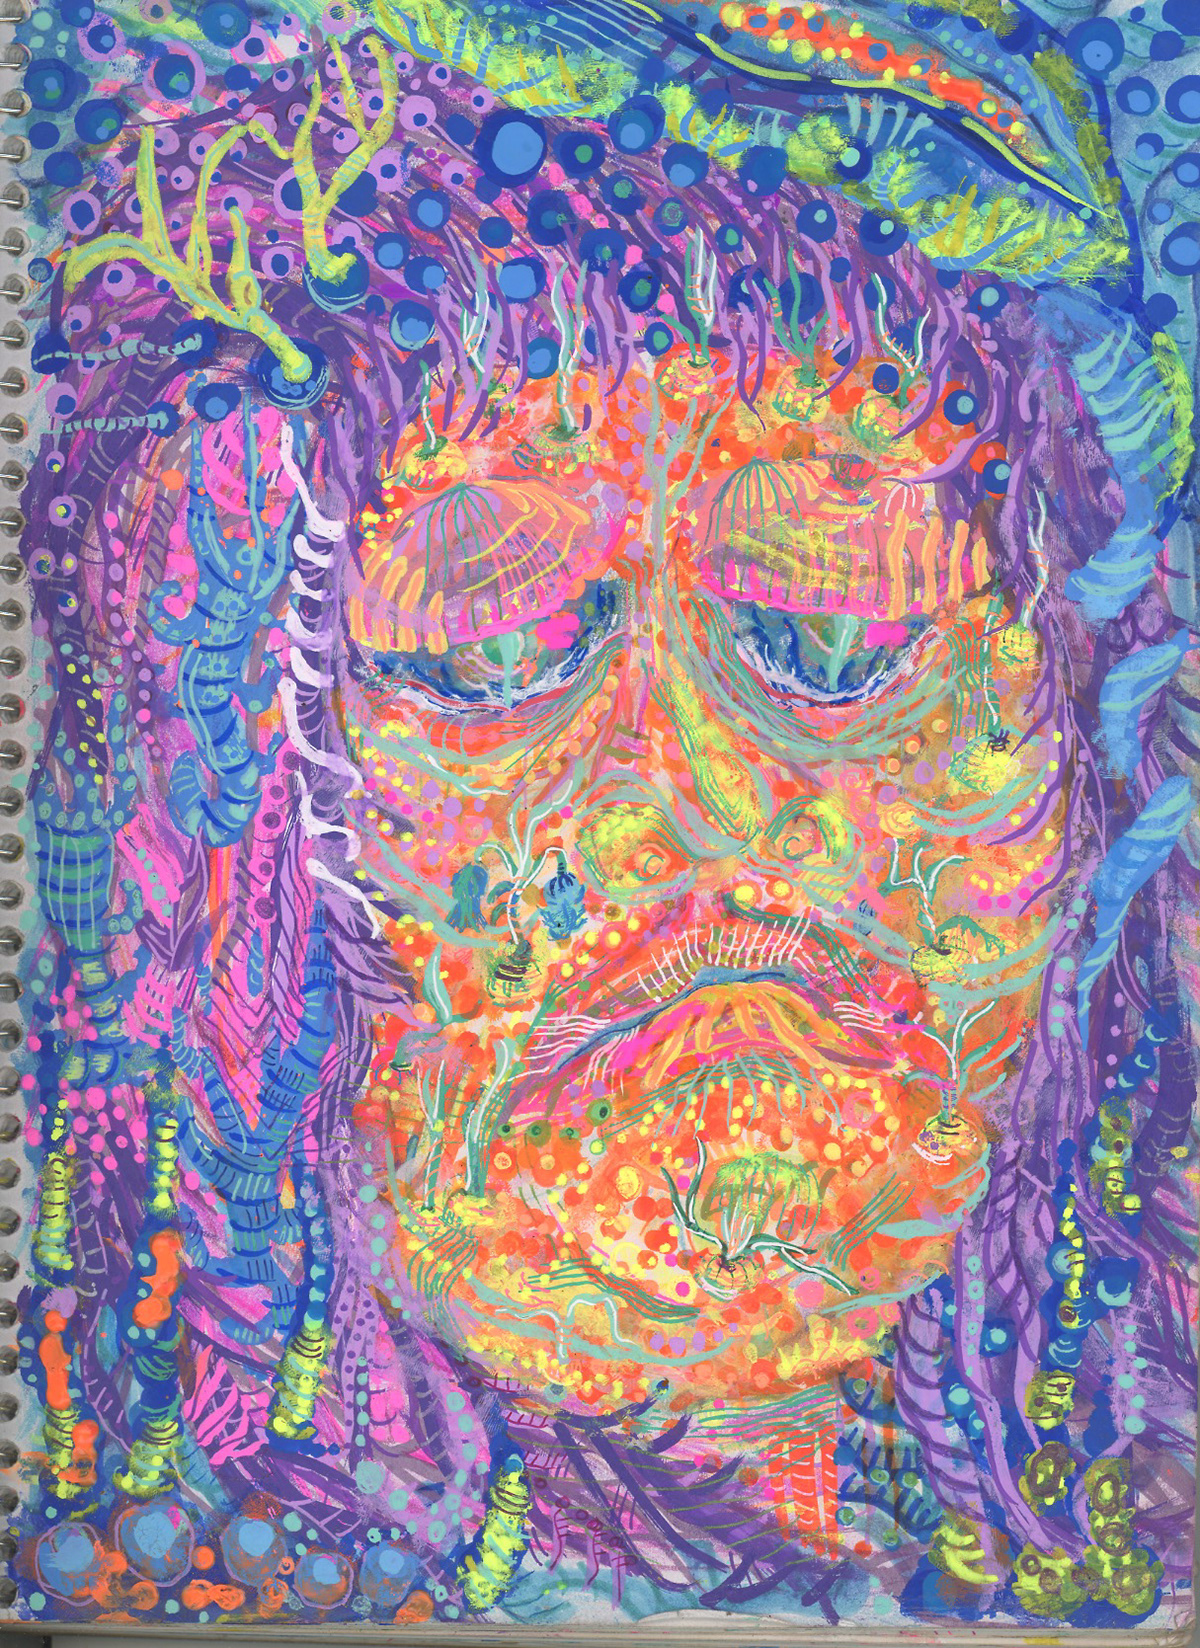 Colorful acrylic painting of abstract face overgrown with plant-like entities, mixed media also used